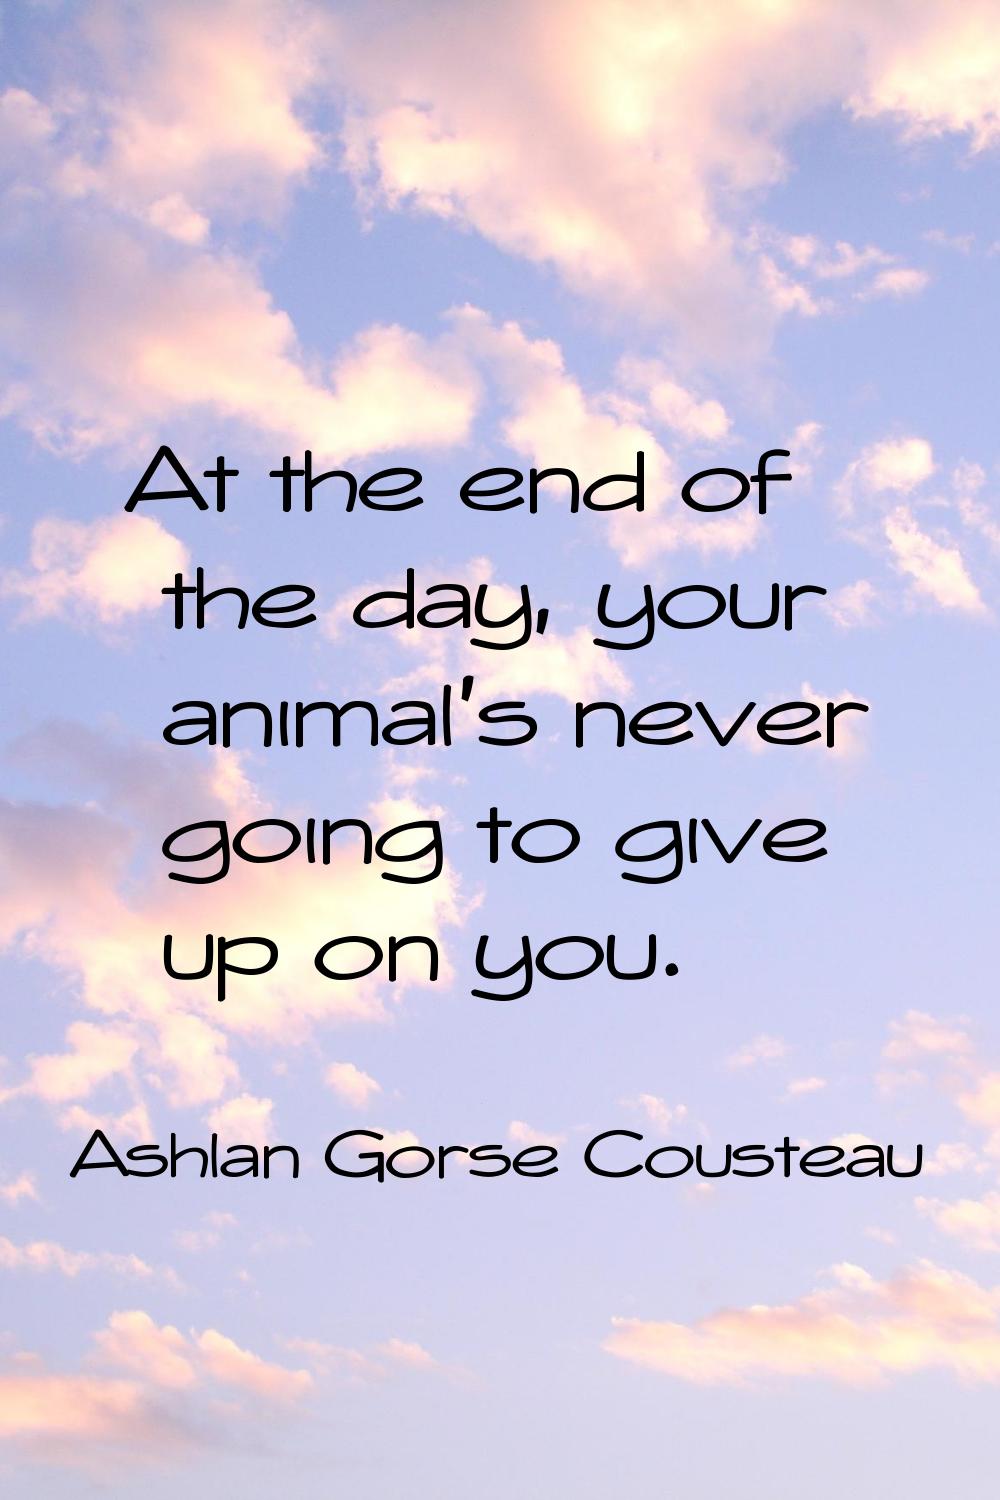 At the end of the day, your animal's never going to give up on you.